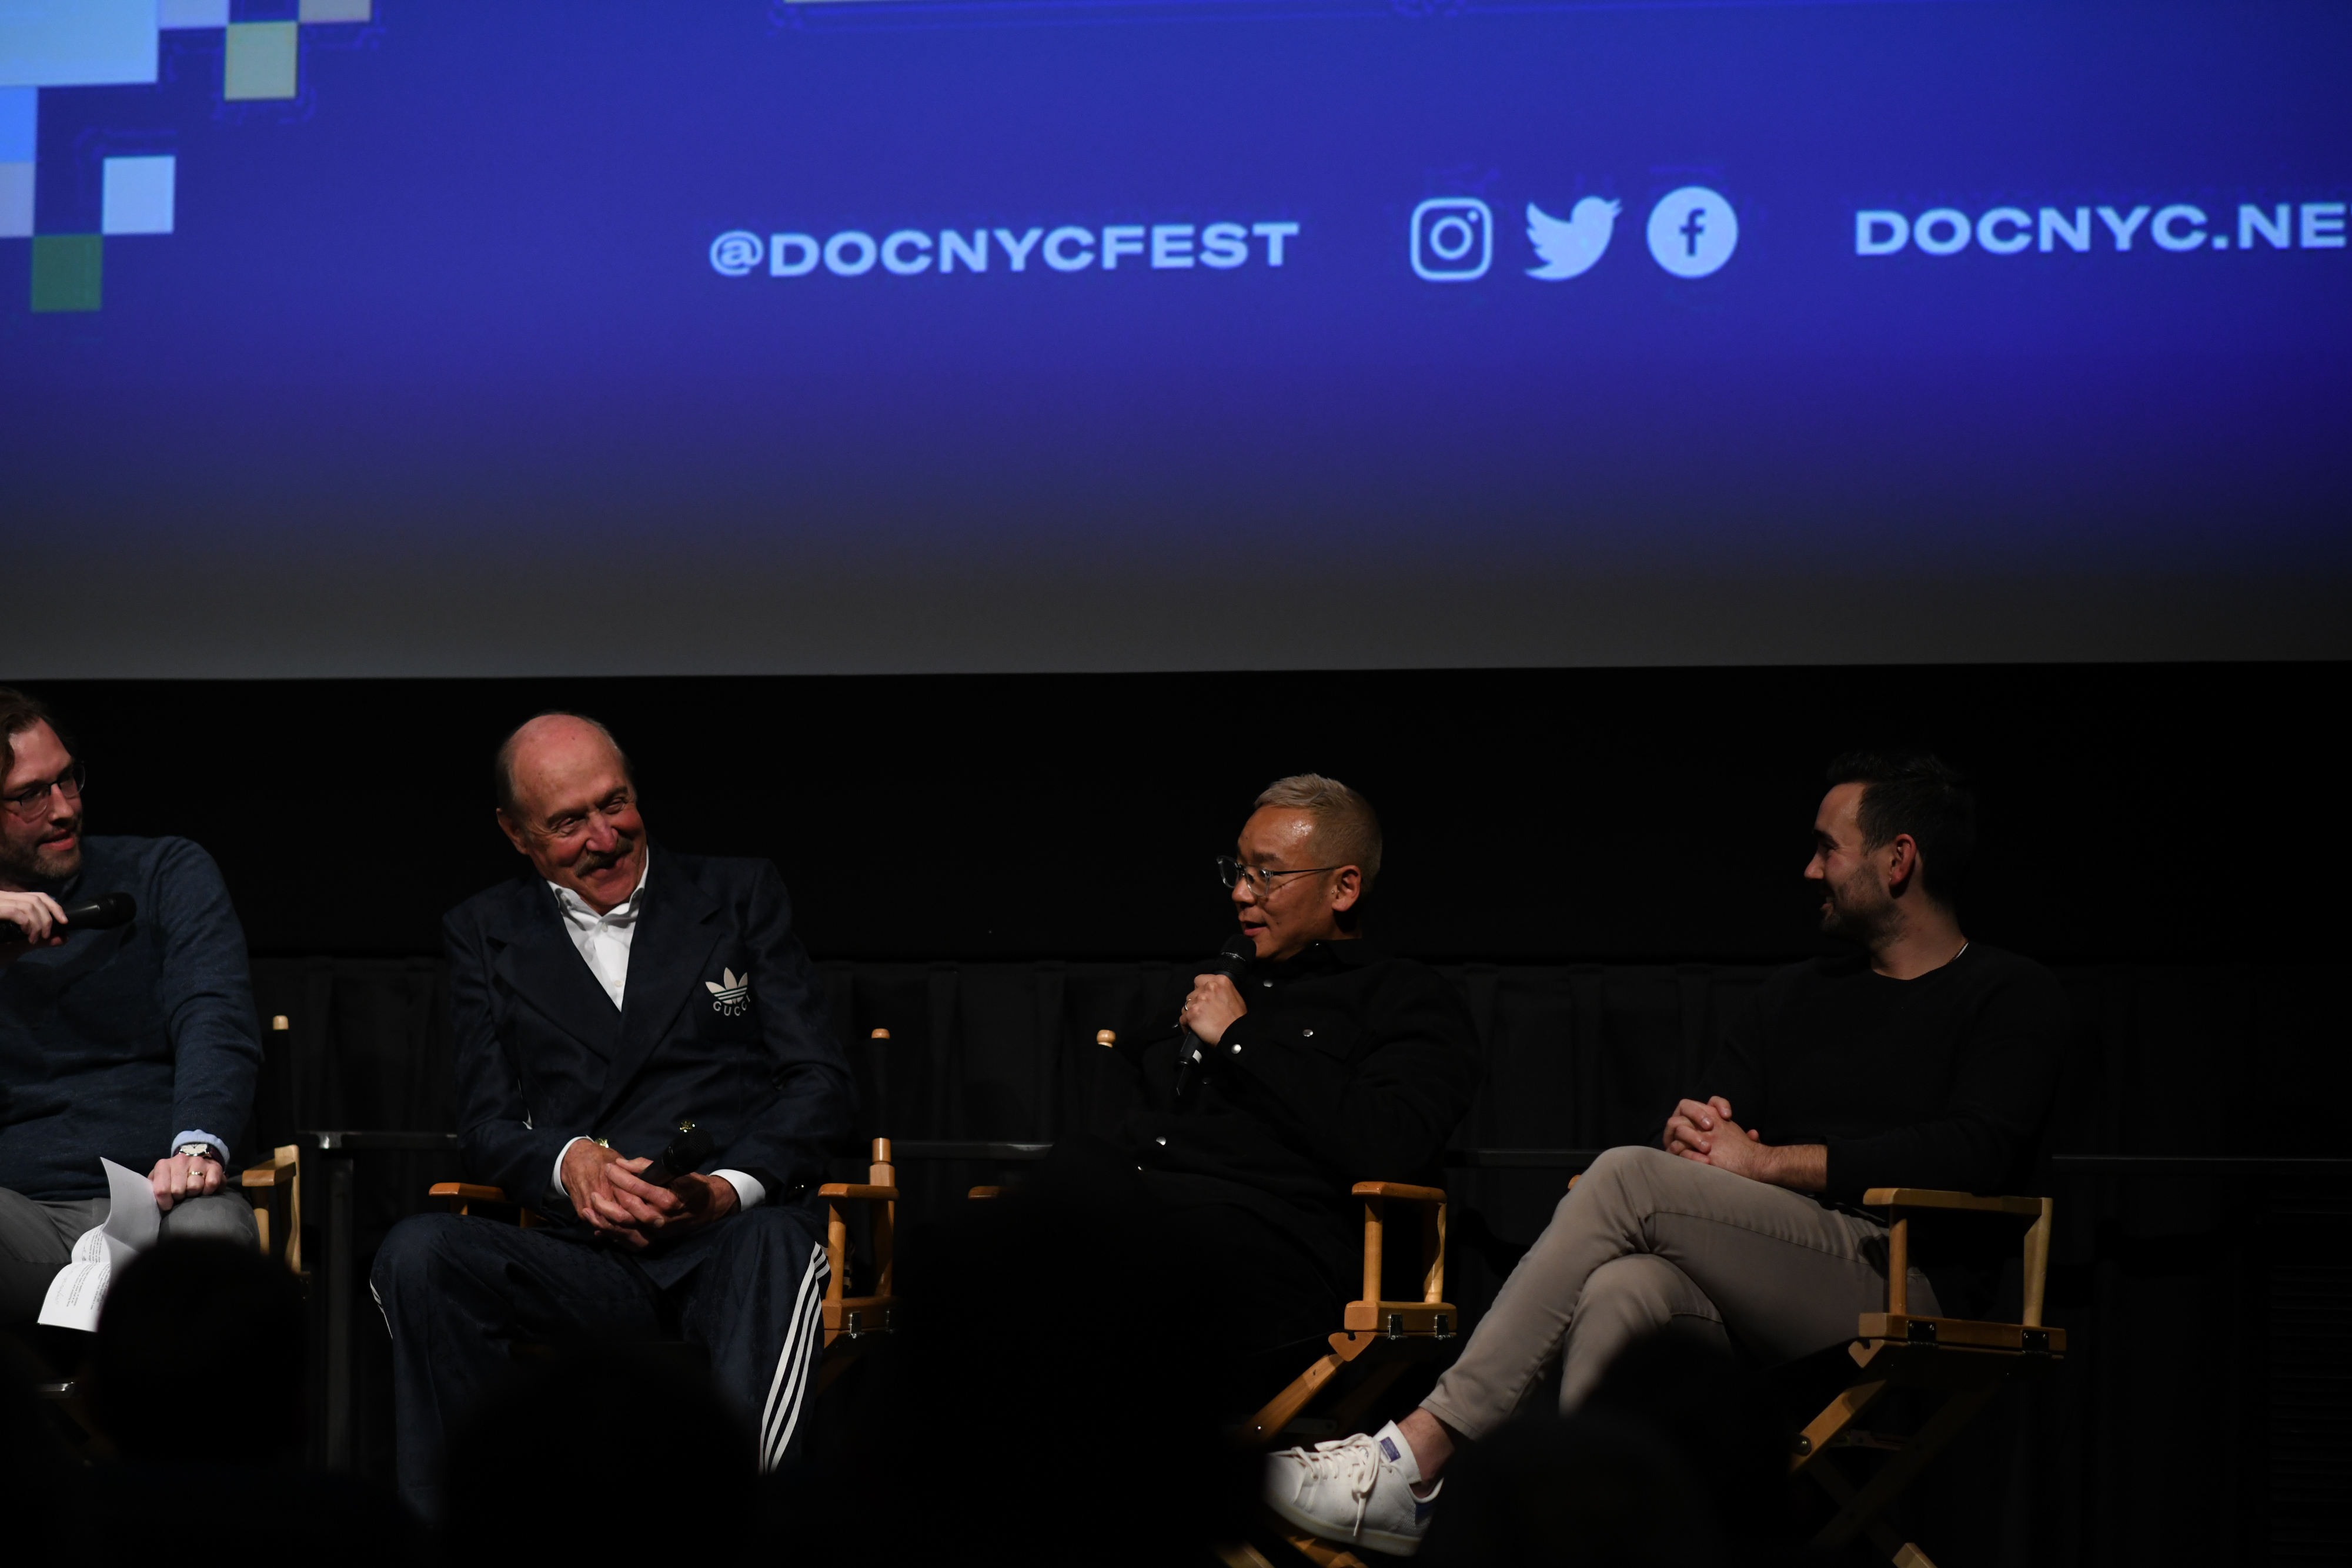 Q+A "Who is Stan Smith?" world premiere @ DOC NYC